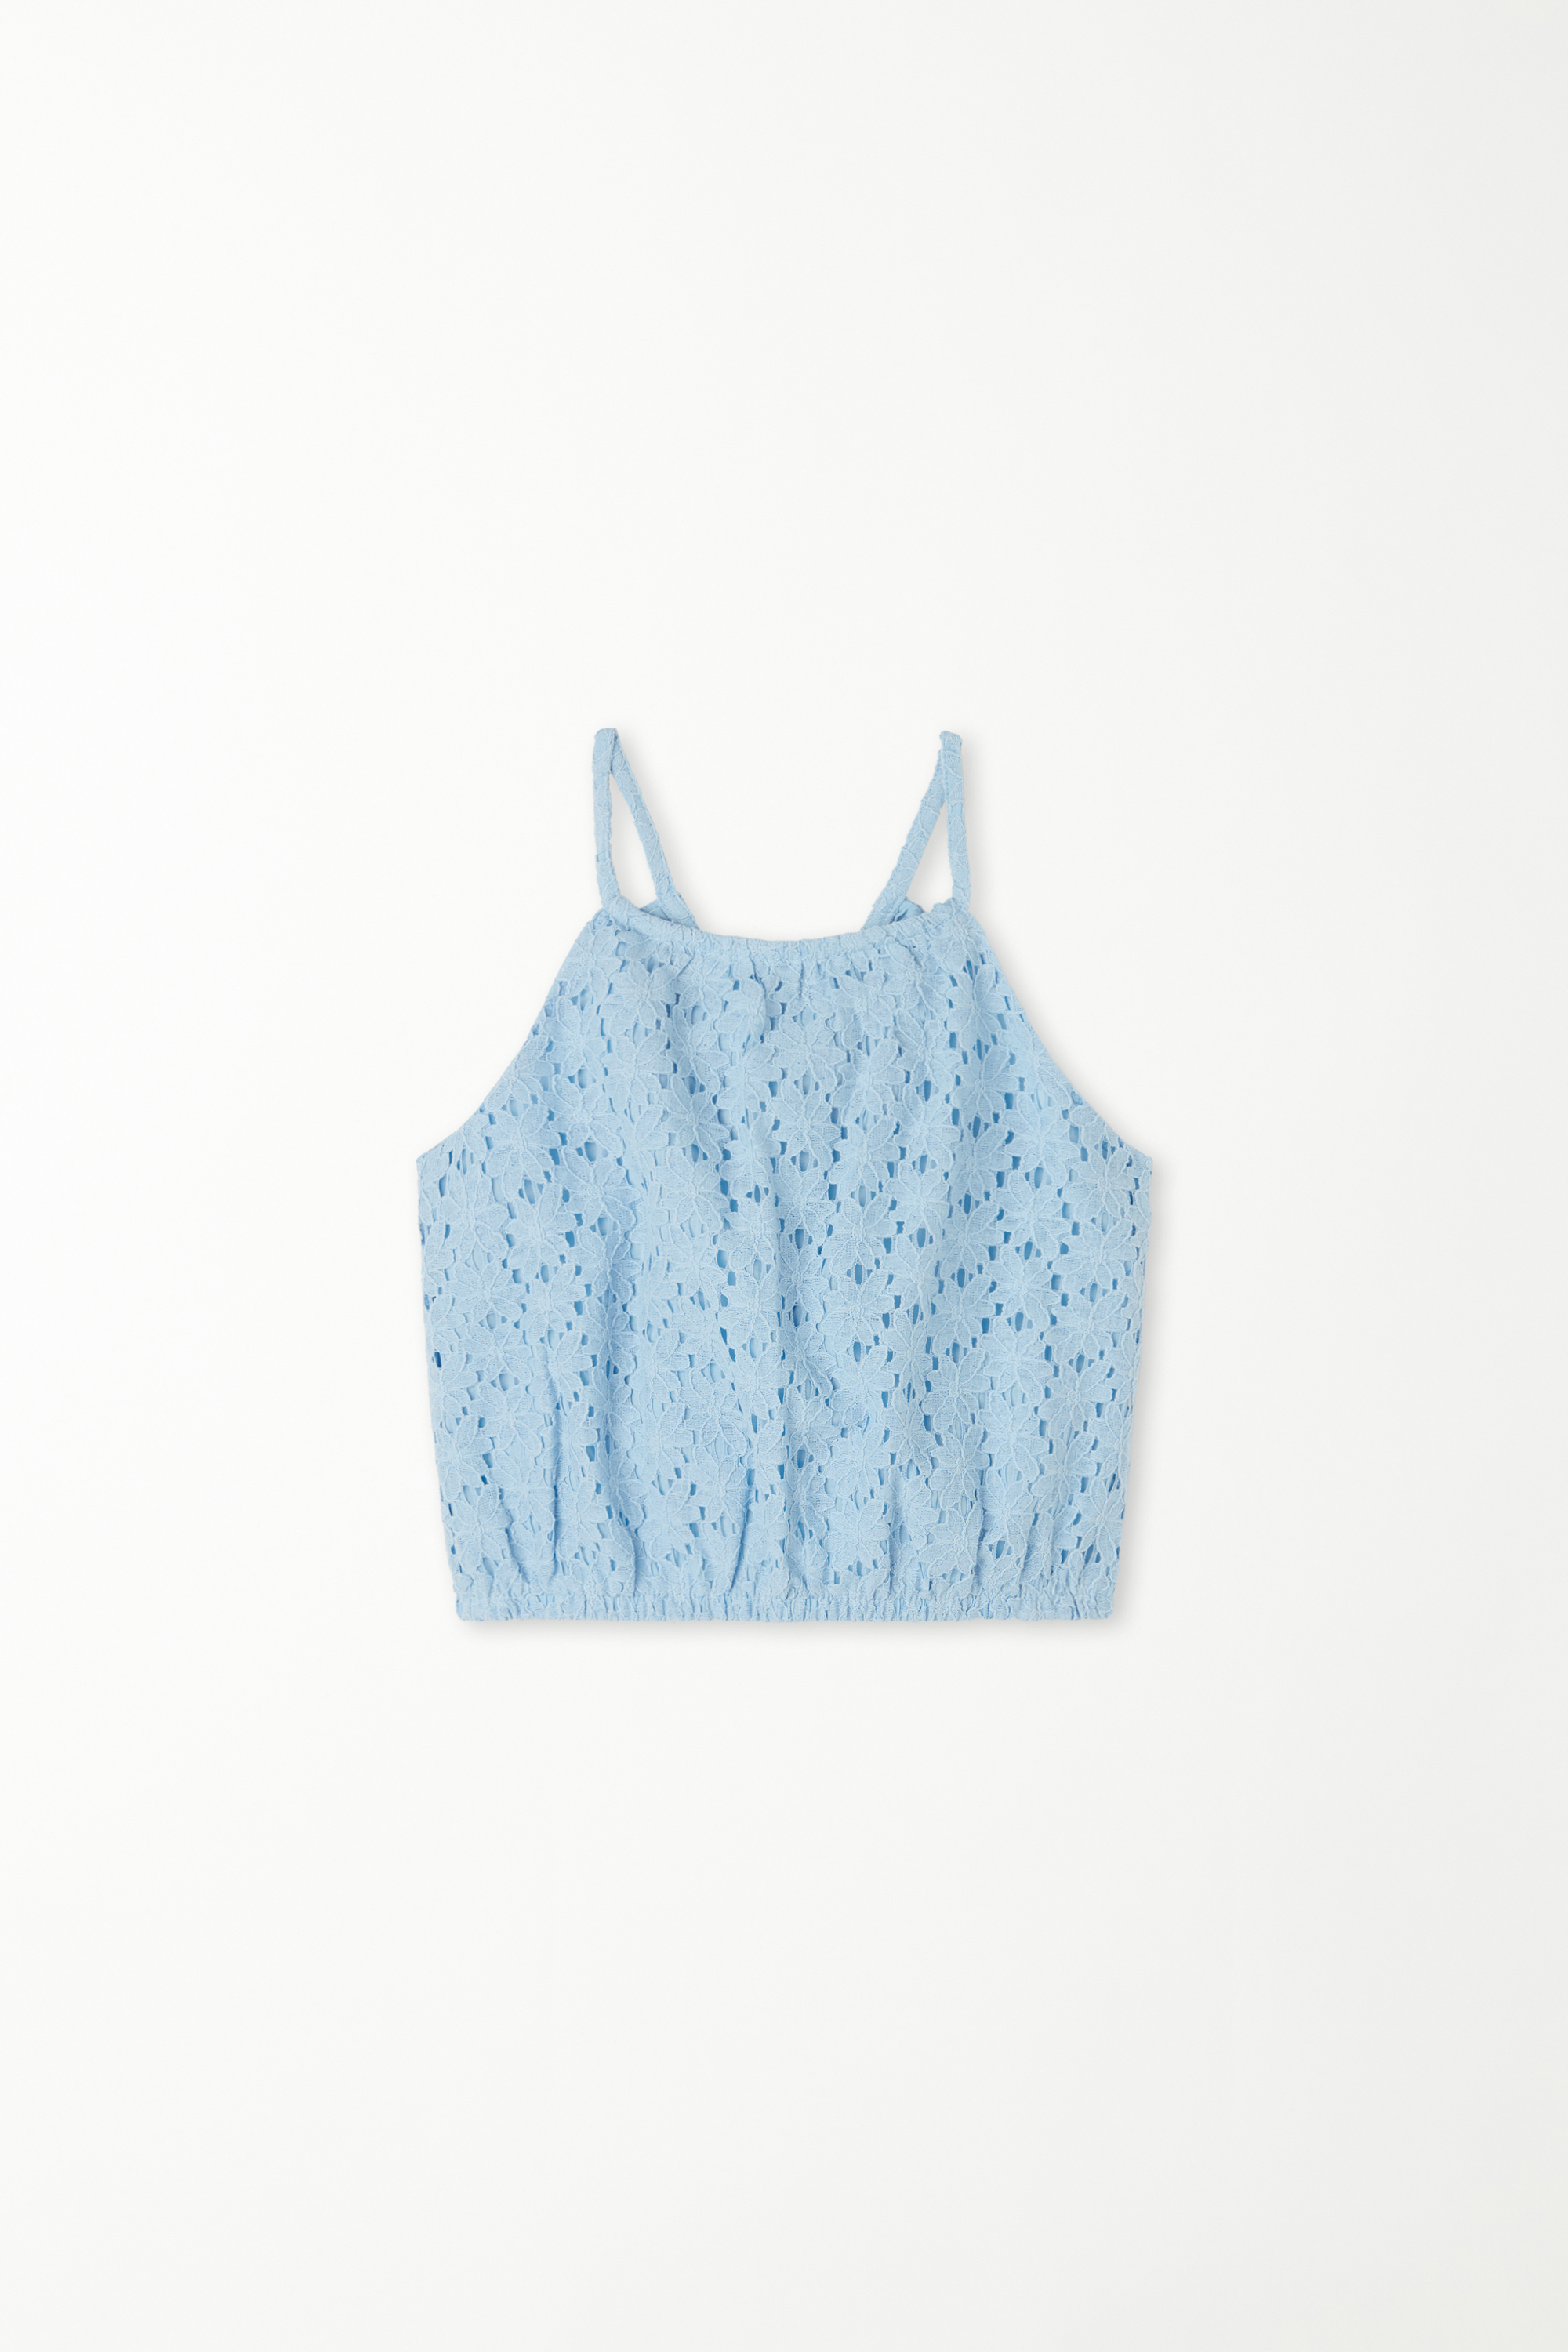 Girls’ Camisole Top with Thin Shoulder Straps made of Lace